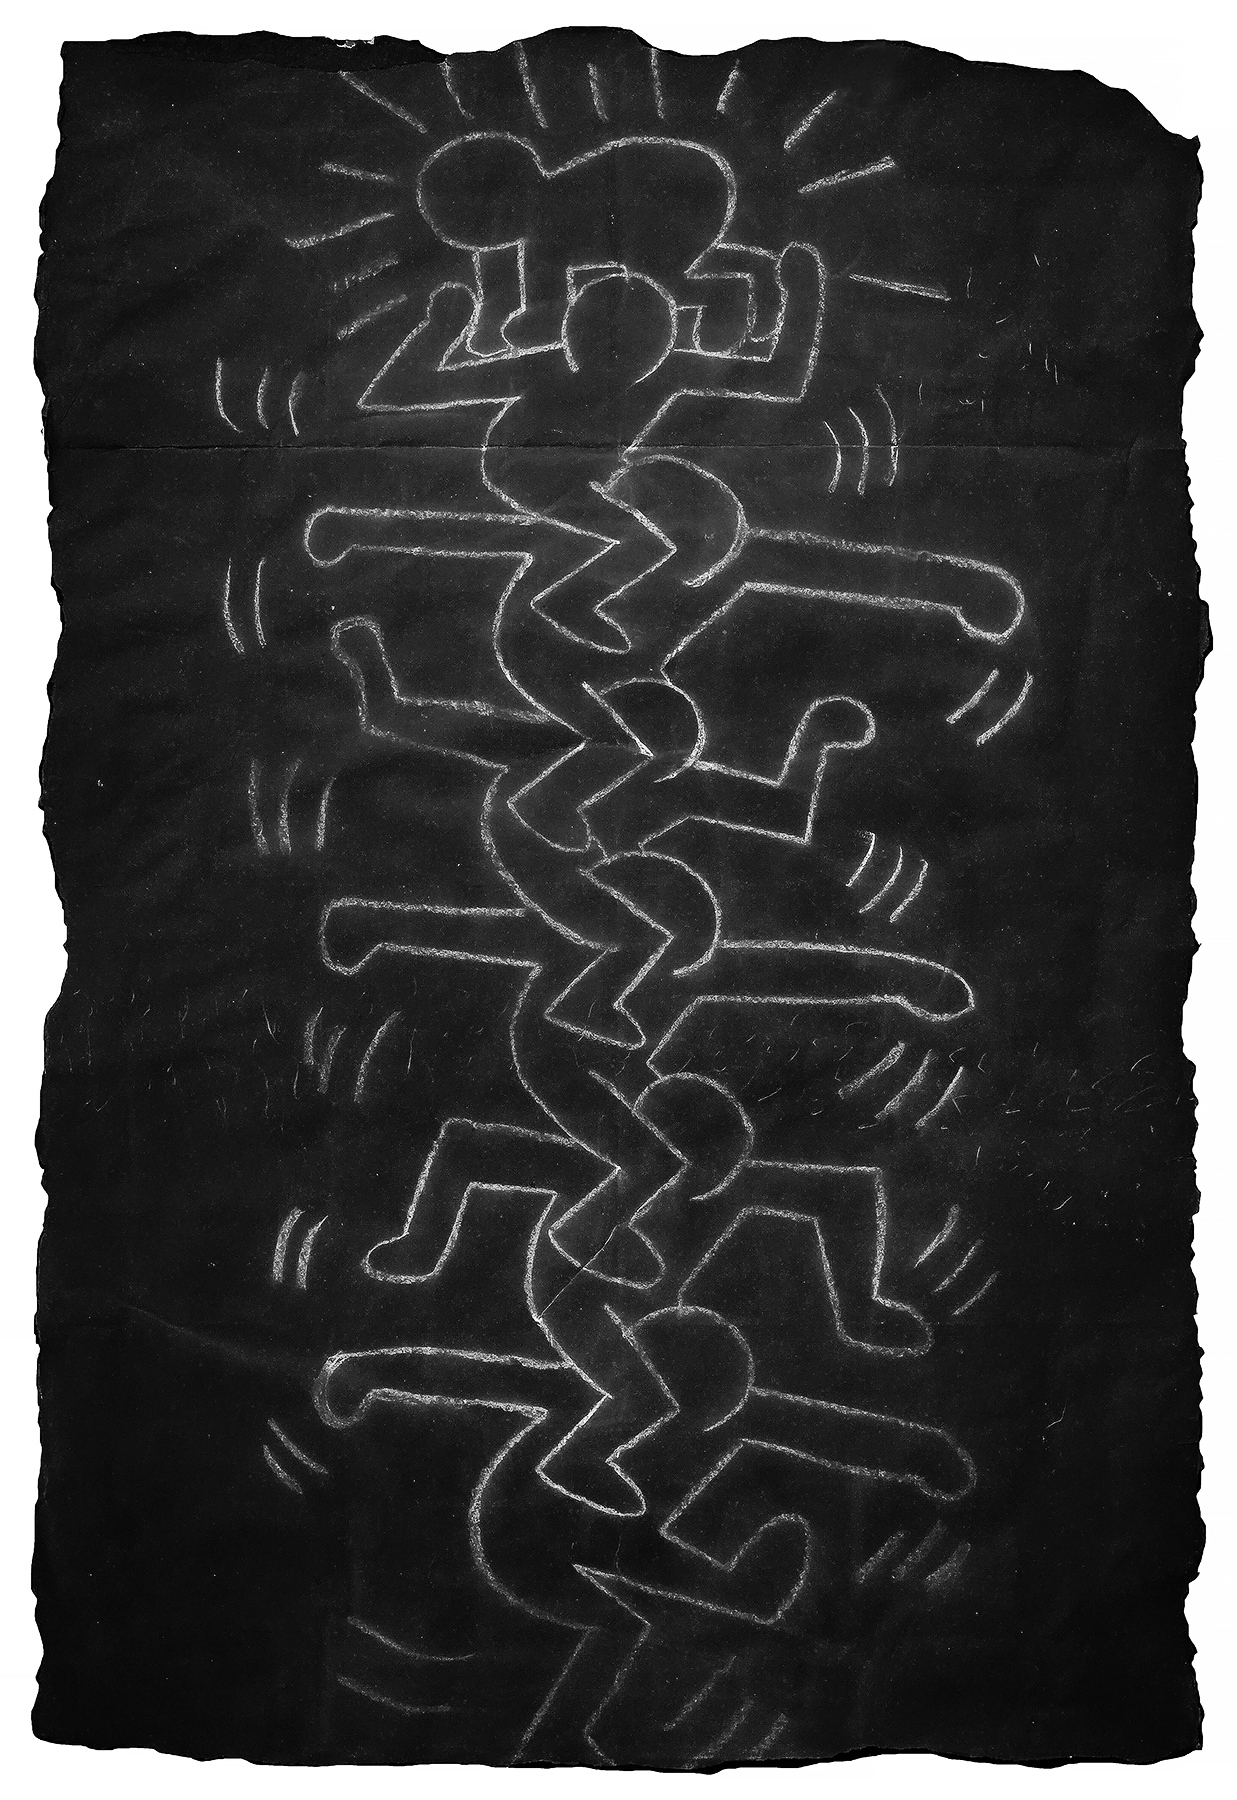 Example of Keith Haring subway chalk drawing featuring stacked figures outlined in white.